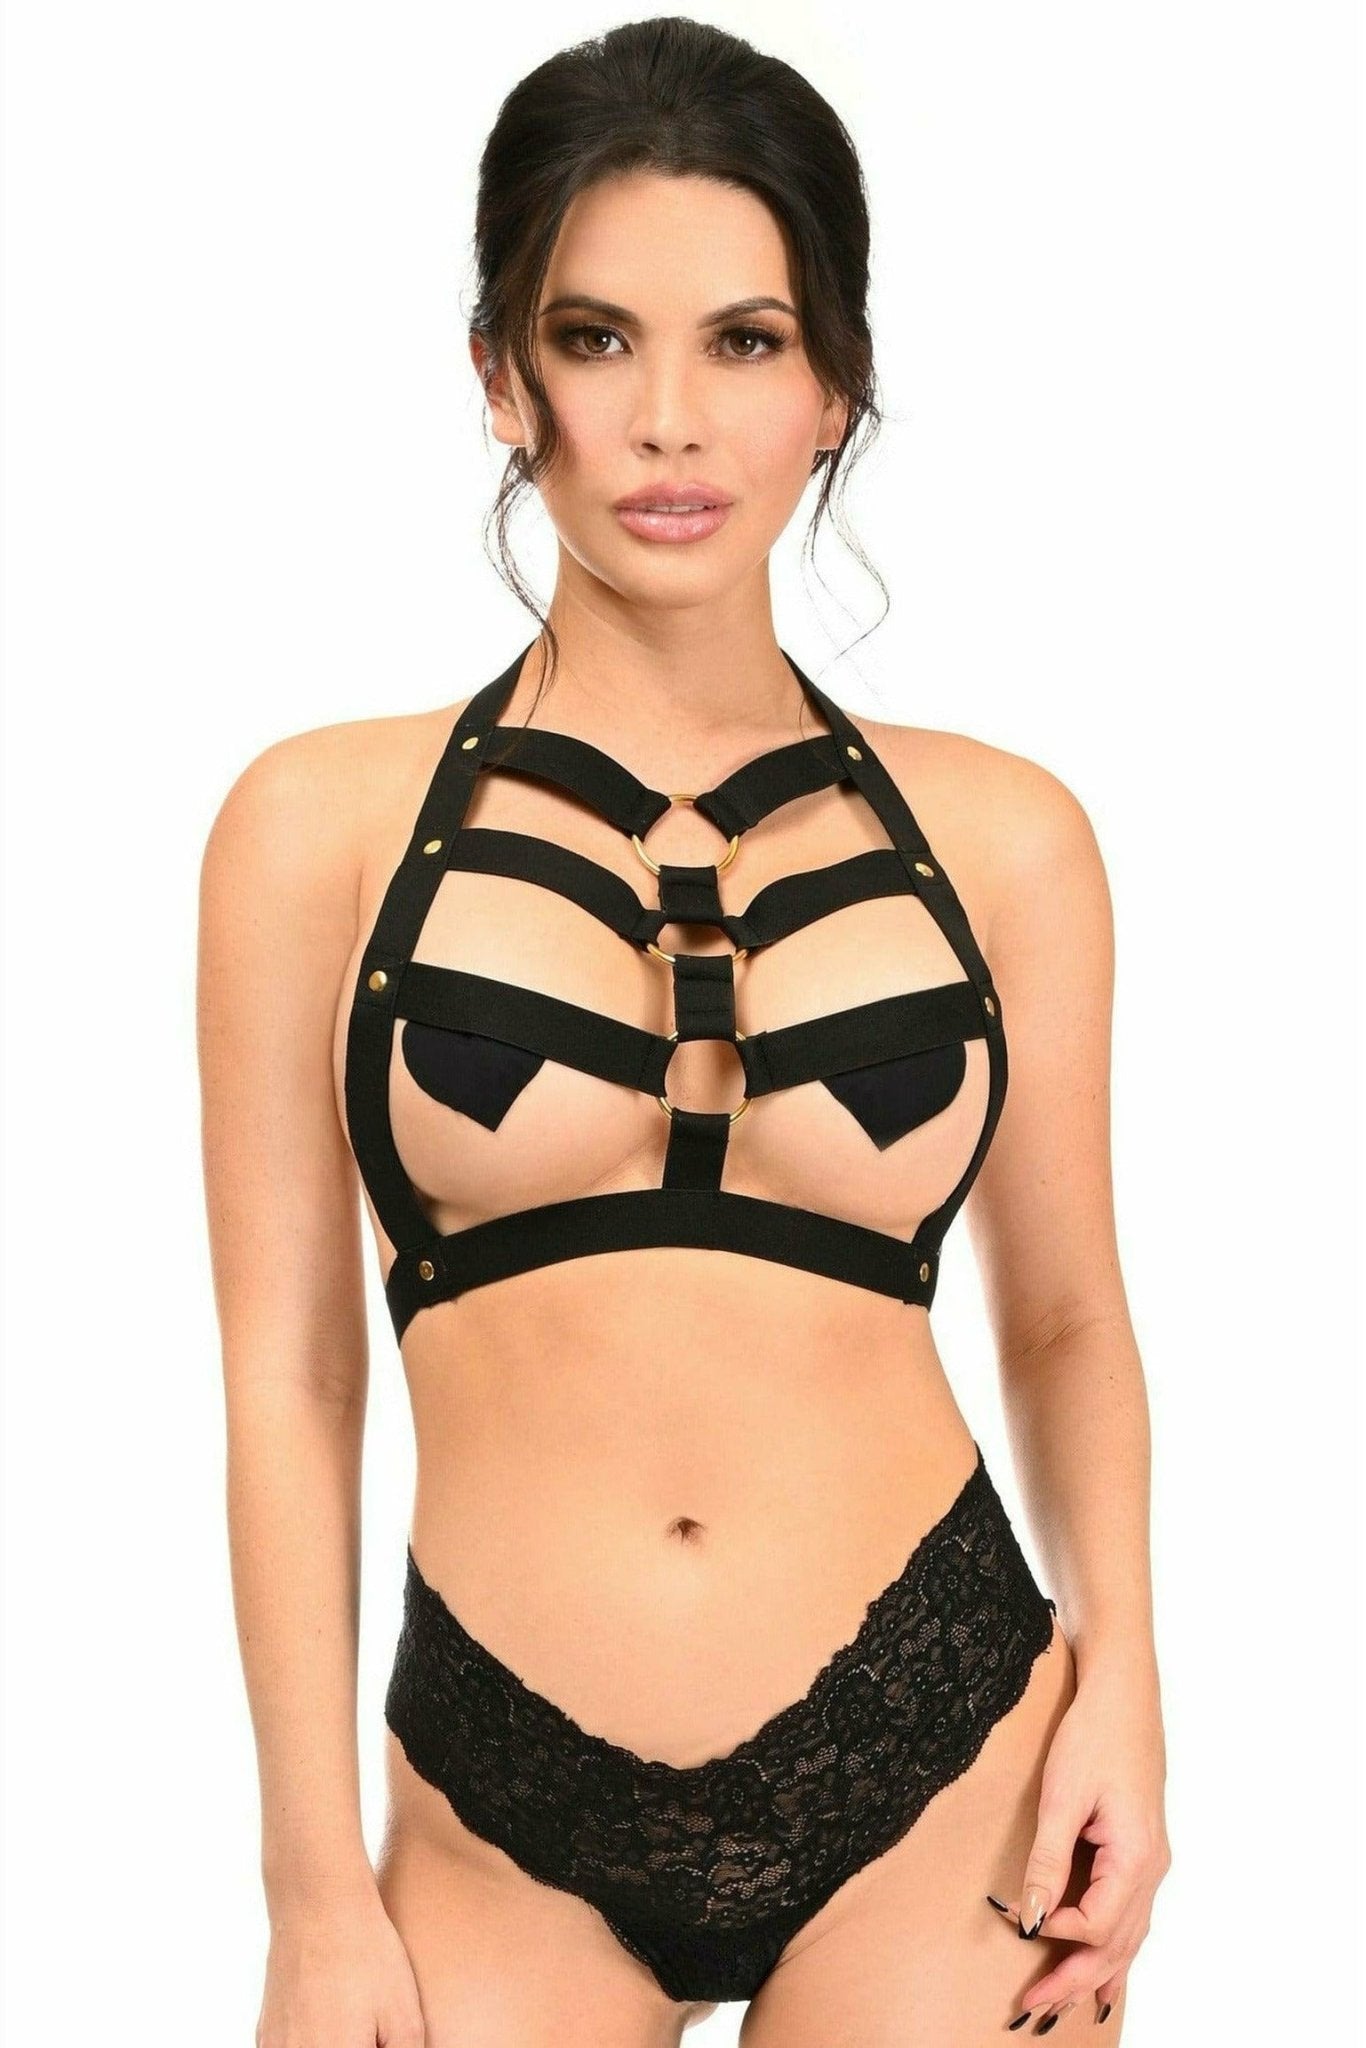 Black Stretchy Body Harness with Gold Hardware Musotica.com